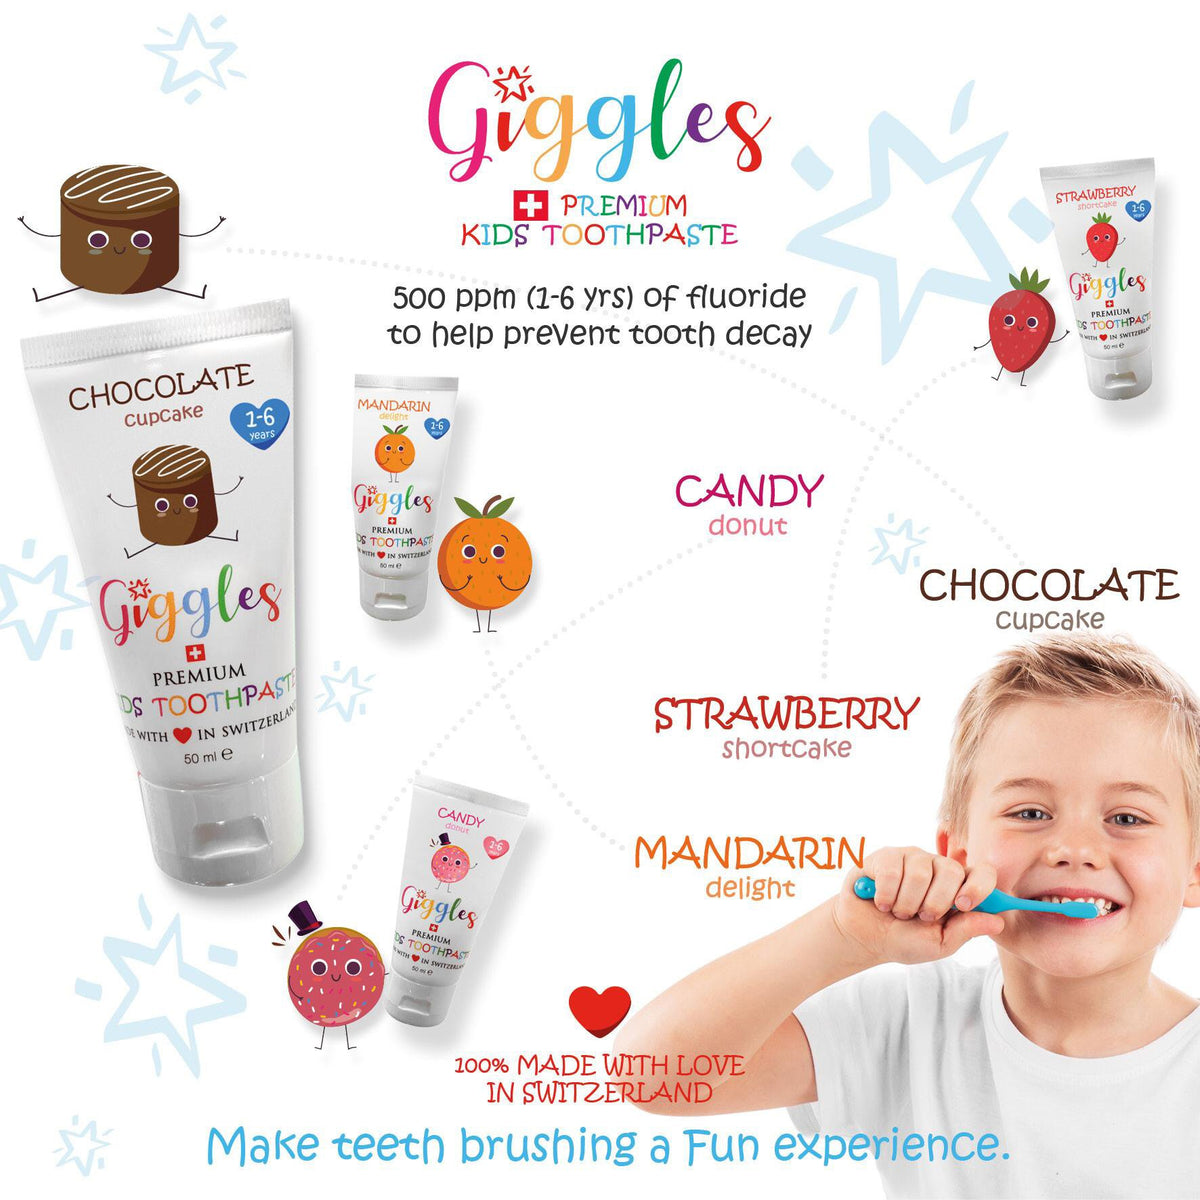 giggles-chocolate-toothpaste- (6)